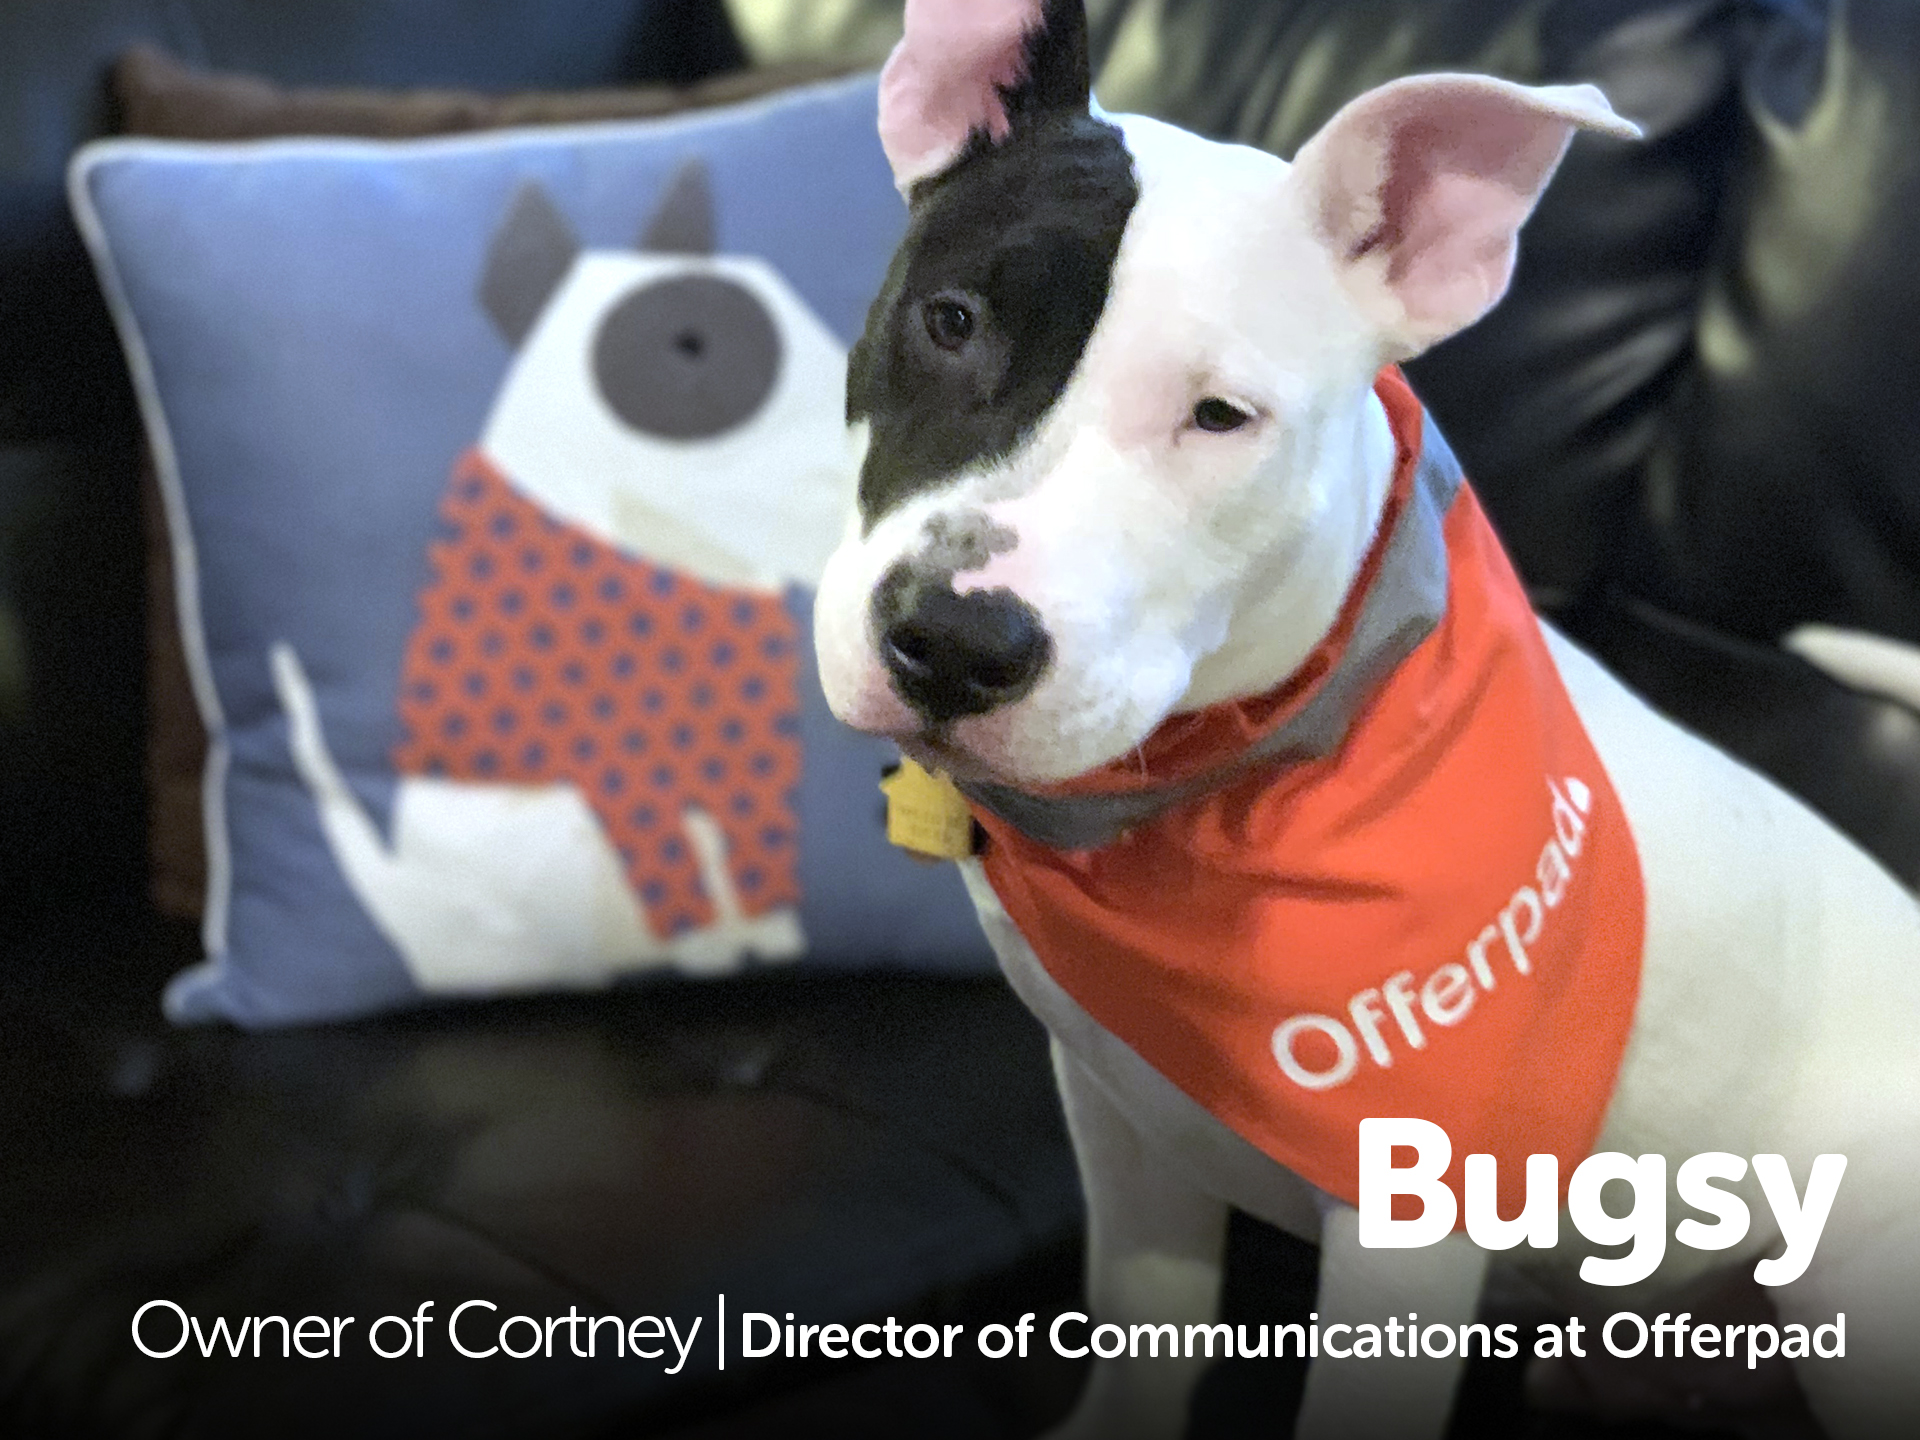 Bugsy - Owner of Cortney